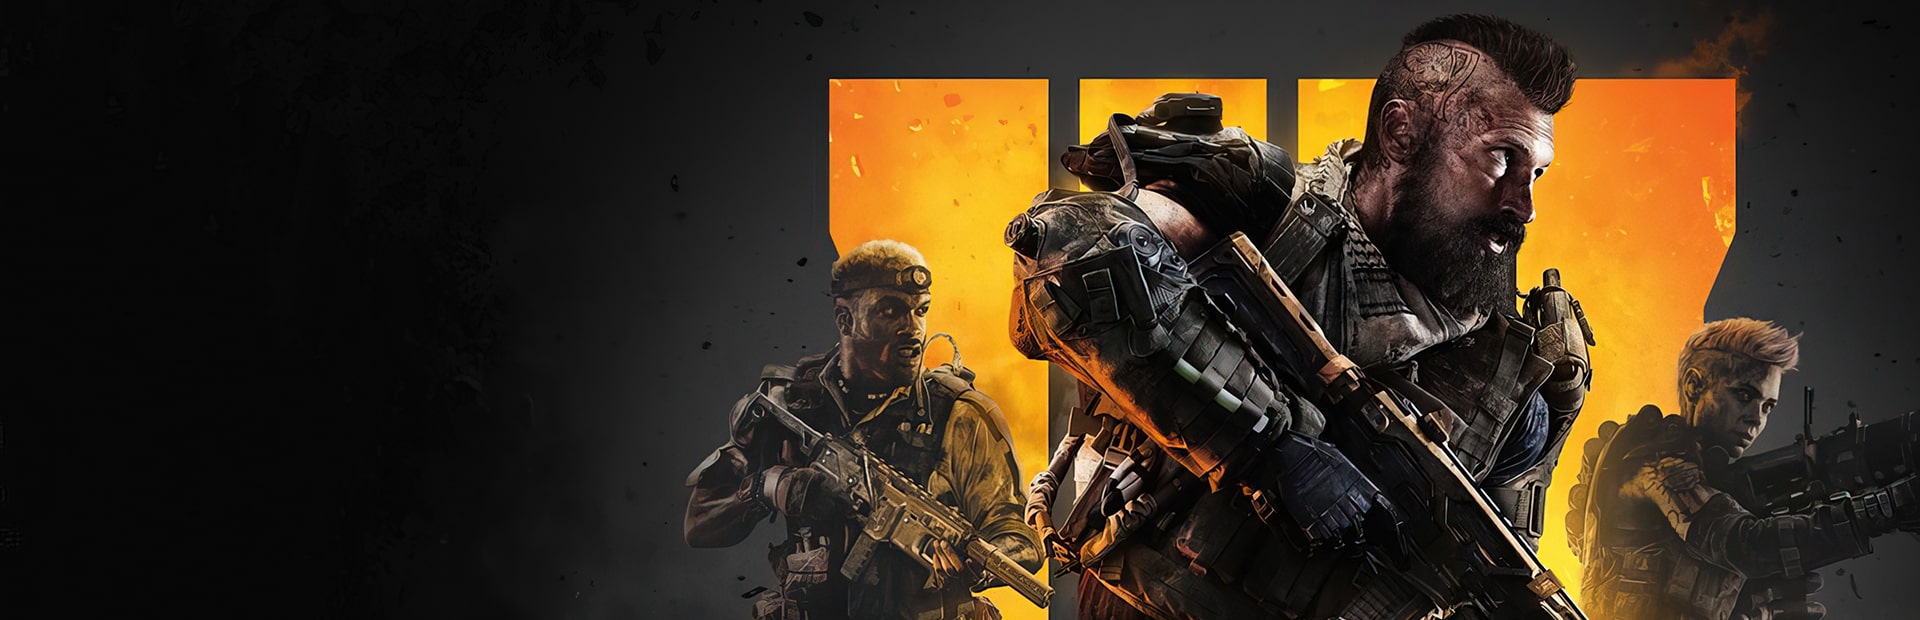 Call of Duty 4: Black Ops 4 PC Review - Nothing of Value Was Lost?